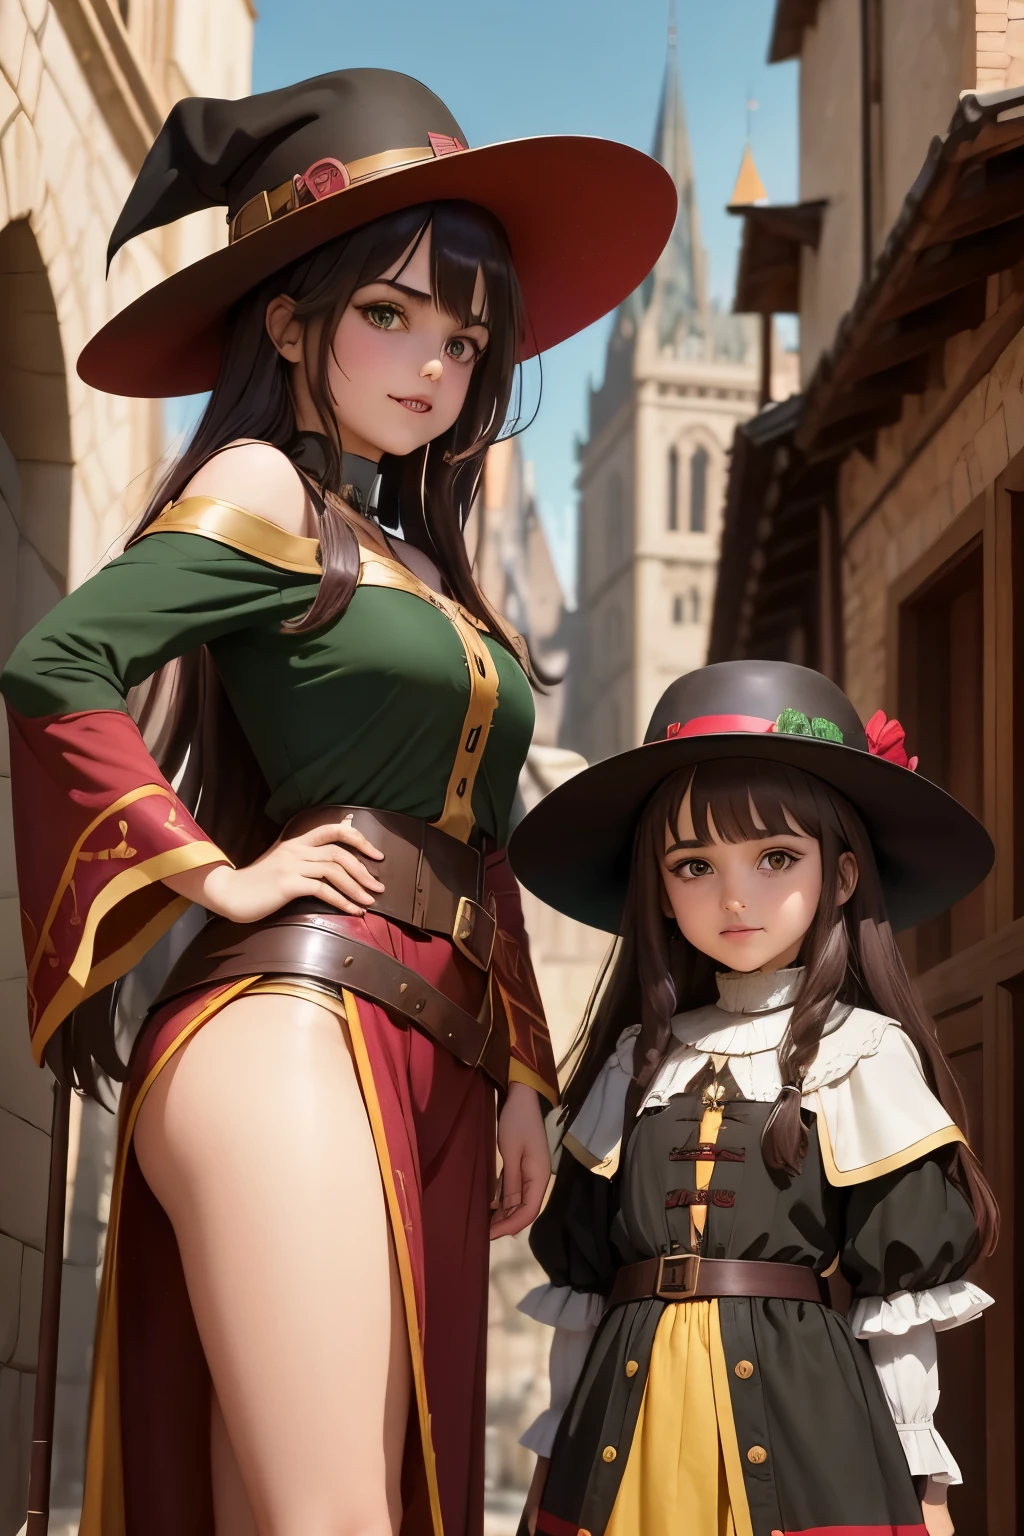 Megumin archimage and her daughter 13 years old Esmeralda archmage's apprentice (Have brunette color hair and dark green eyes, wearing sorcerer hats, medieval city, fight against enemy,